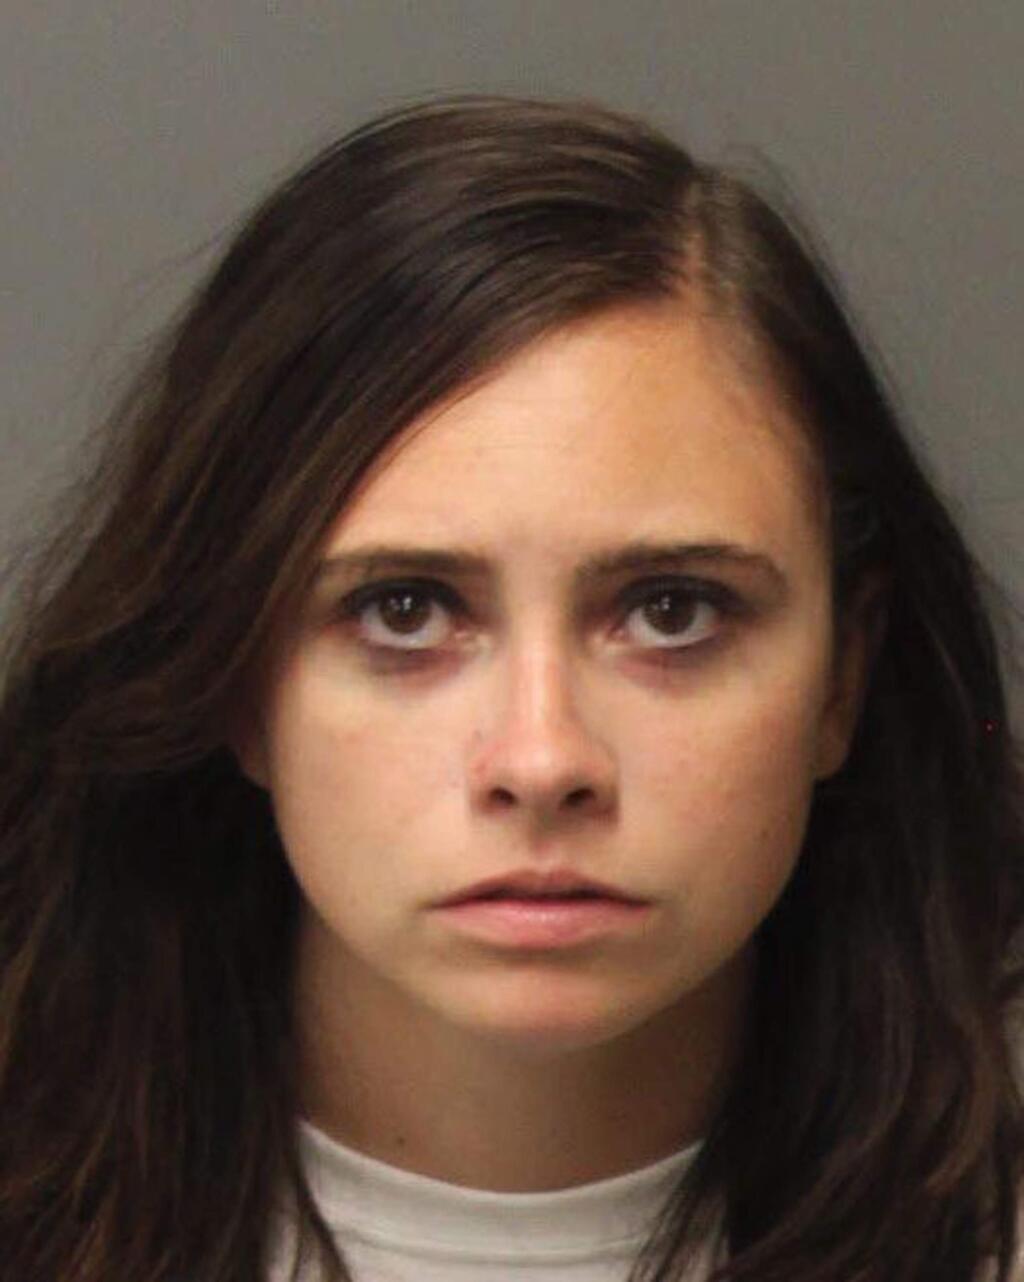 This undated booking photo released by the Corona, Calif., Police Department shows Shawna Andritch, 22. Days after the funeral of a newborn girl found dead last summer along a Southern California highway, police have announced two arrests in the case. Officials said Thursday, Dec. 13, 2018 that following last week's memorial service, detectives received information that led to the arrest of Andritch and an unnamed 17-year-old boy on suspicion of murder. 'Baby Jane Doe' was discovered July 27, 2018, in a cardboard box near Interstate 15. (Corona Police Department via AP)